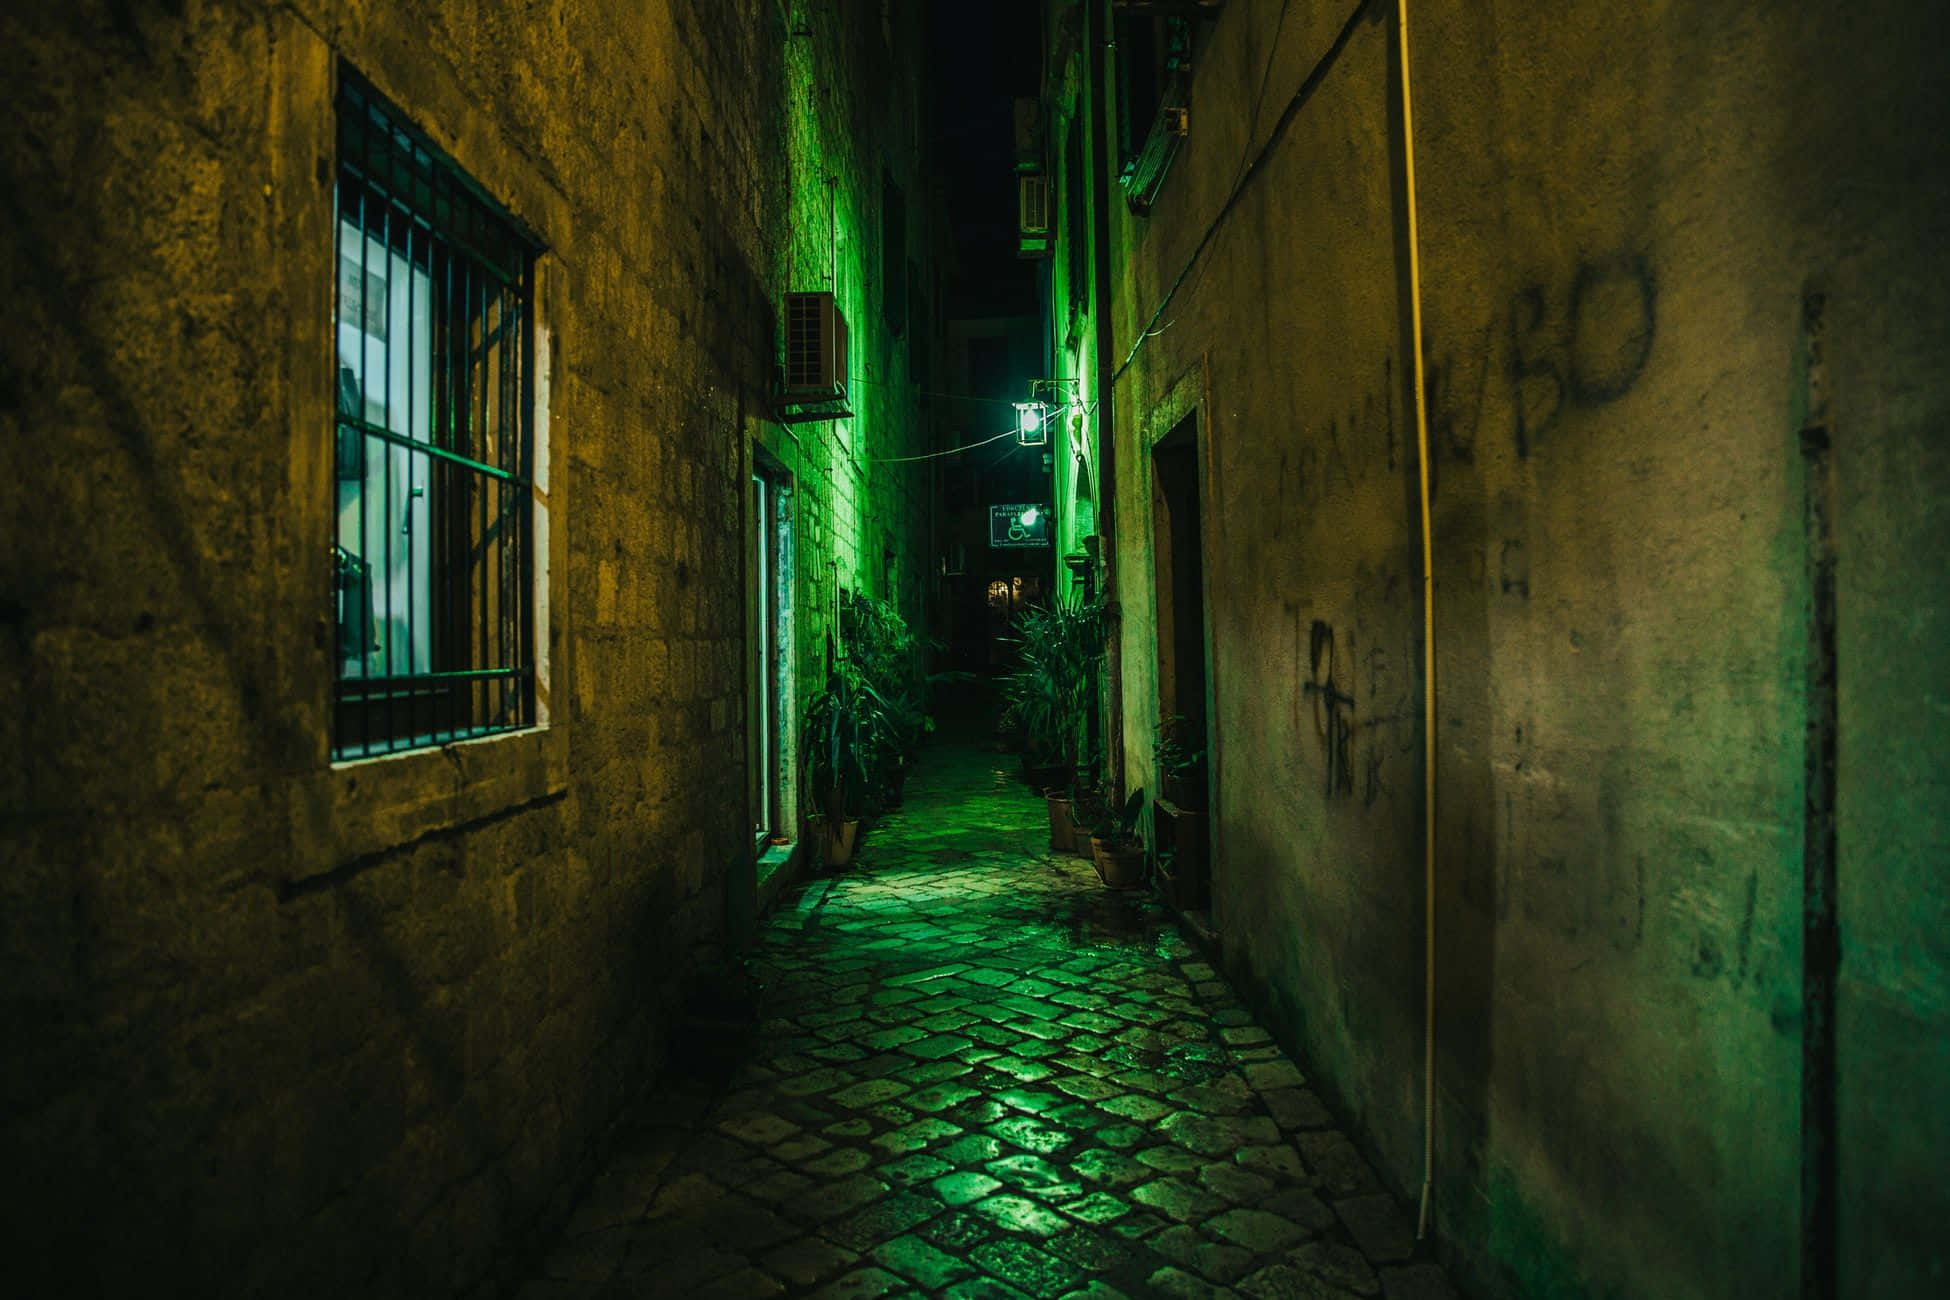 Explore the charming alleyways of the city.